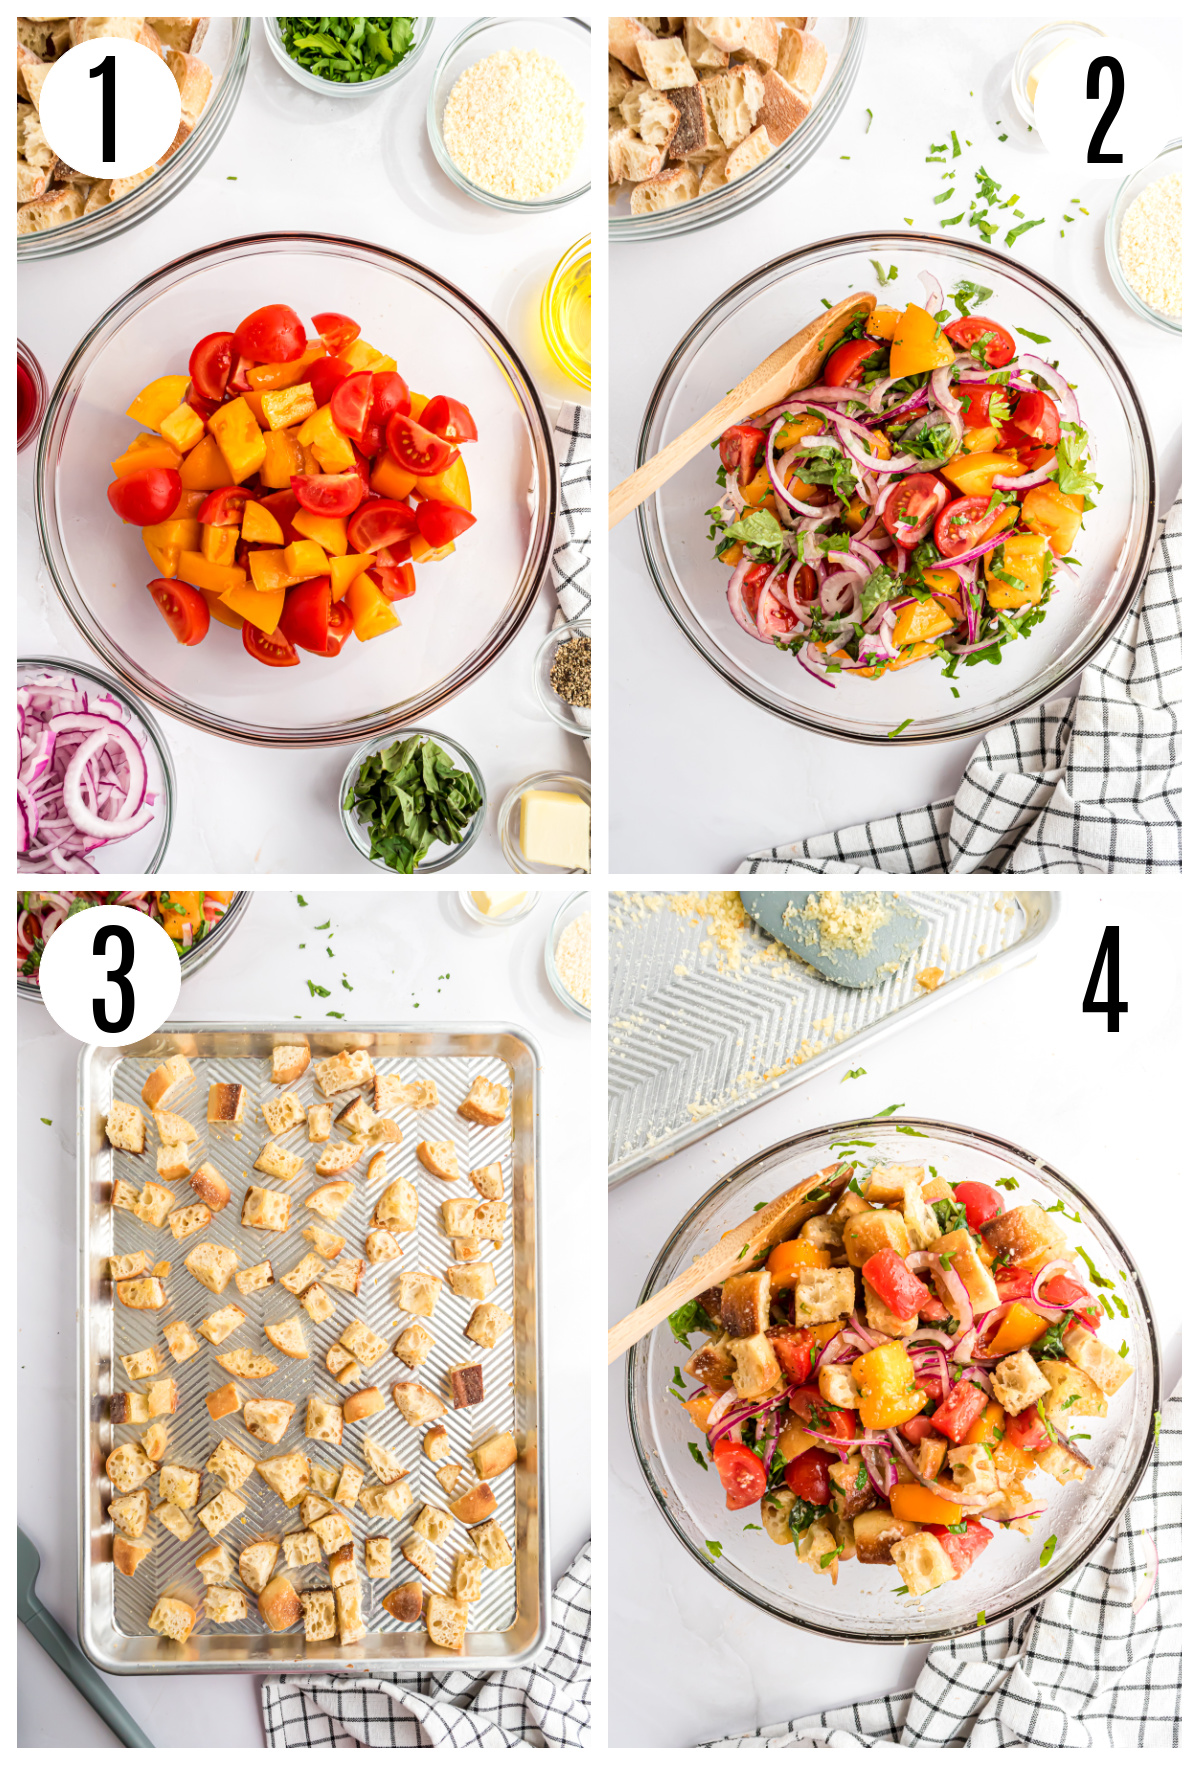 A collage showing the steps to make the Panzanella including cutting the tomatoes, combining the ingredients in a large mixing bowl, toasting the croutons, and combining the dried bread with the tomato mixture.